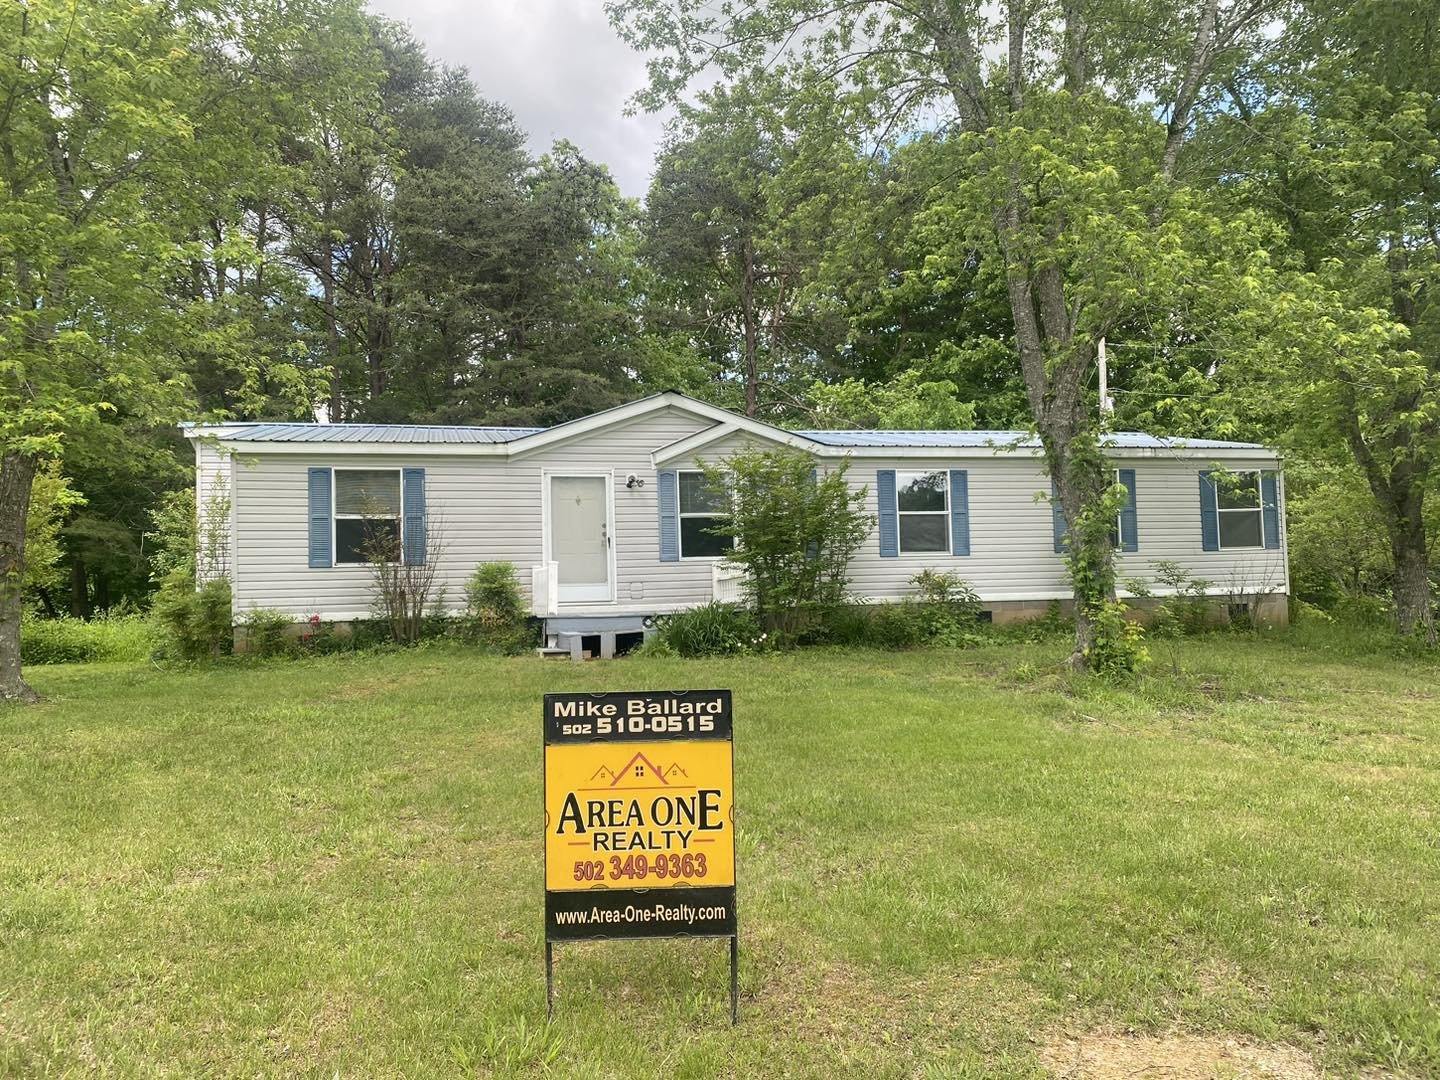 ‼️‼️NEW LISTING ‼️‼️NEW LISTING‼️‼️ Take a look at Area One Realty&rsquo;s GREAT NEW LISTING at 1115 McCubbins Lane offered by Mike &amp; Kathy Ballard

Three bedroom two bath 2001 Oakwood 28x60 manufactured home on 5.74 quiet country acres in Nelson